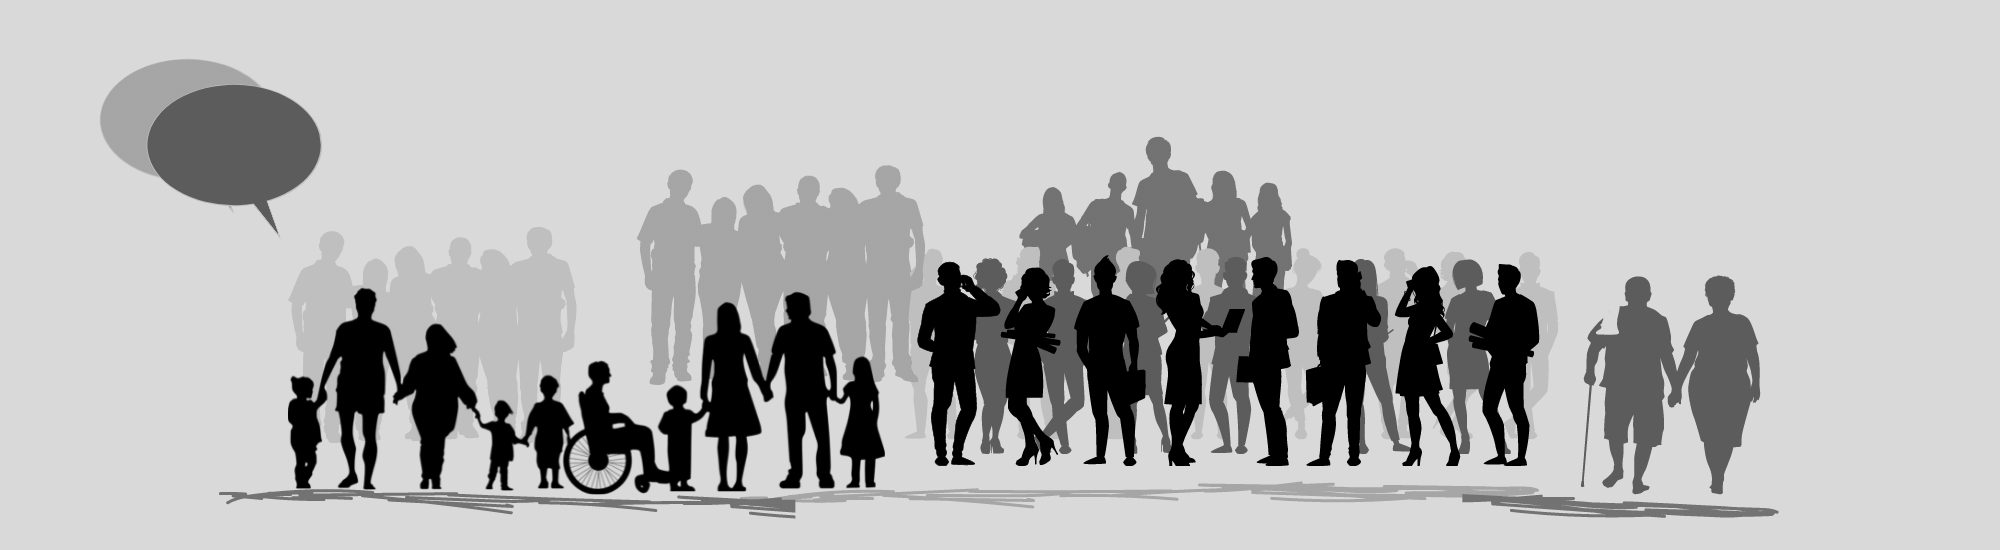 groups of people in silhouette